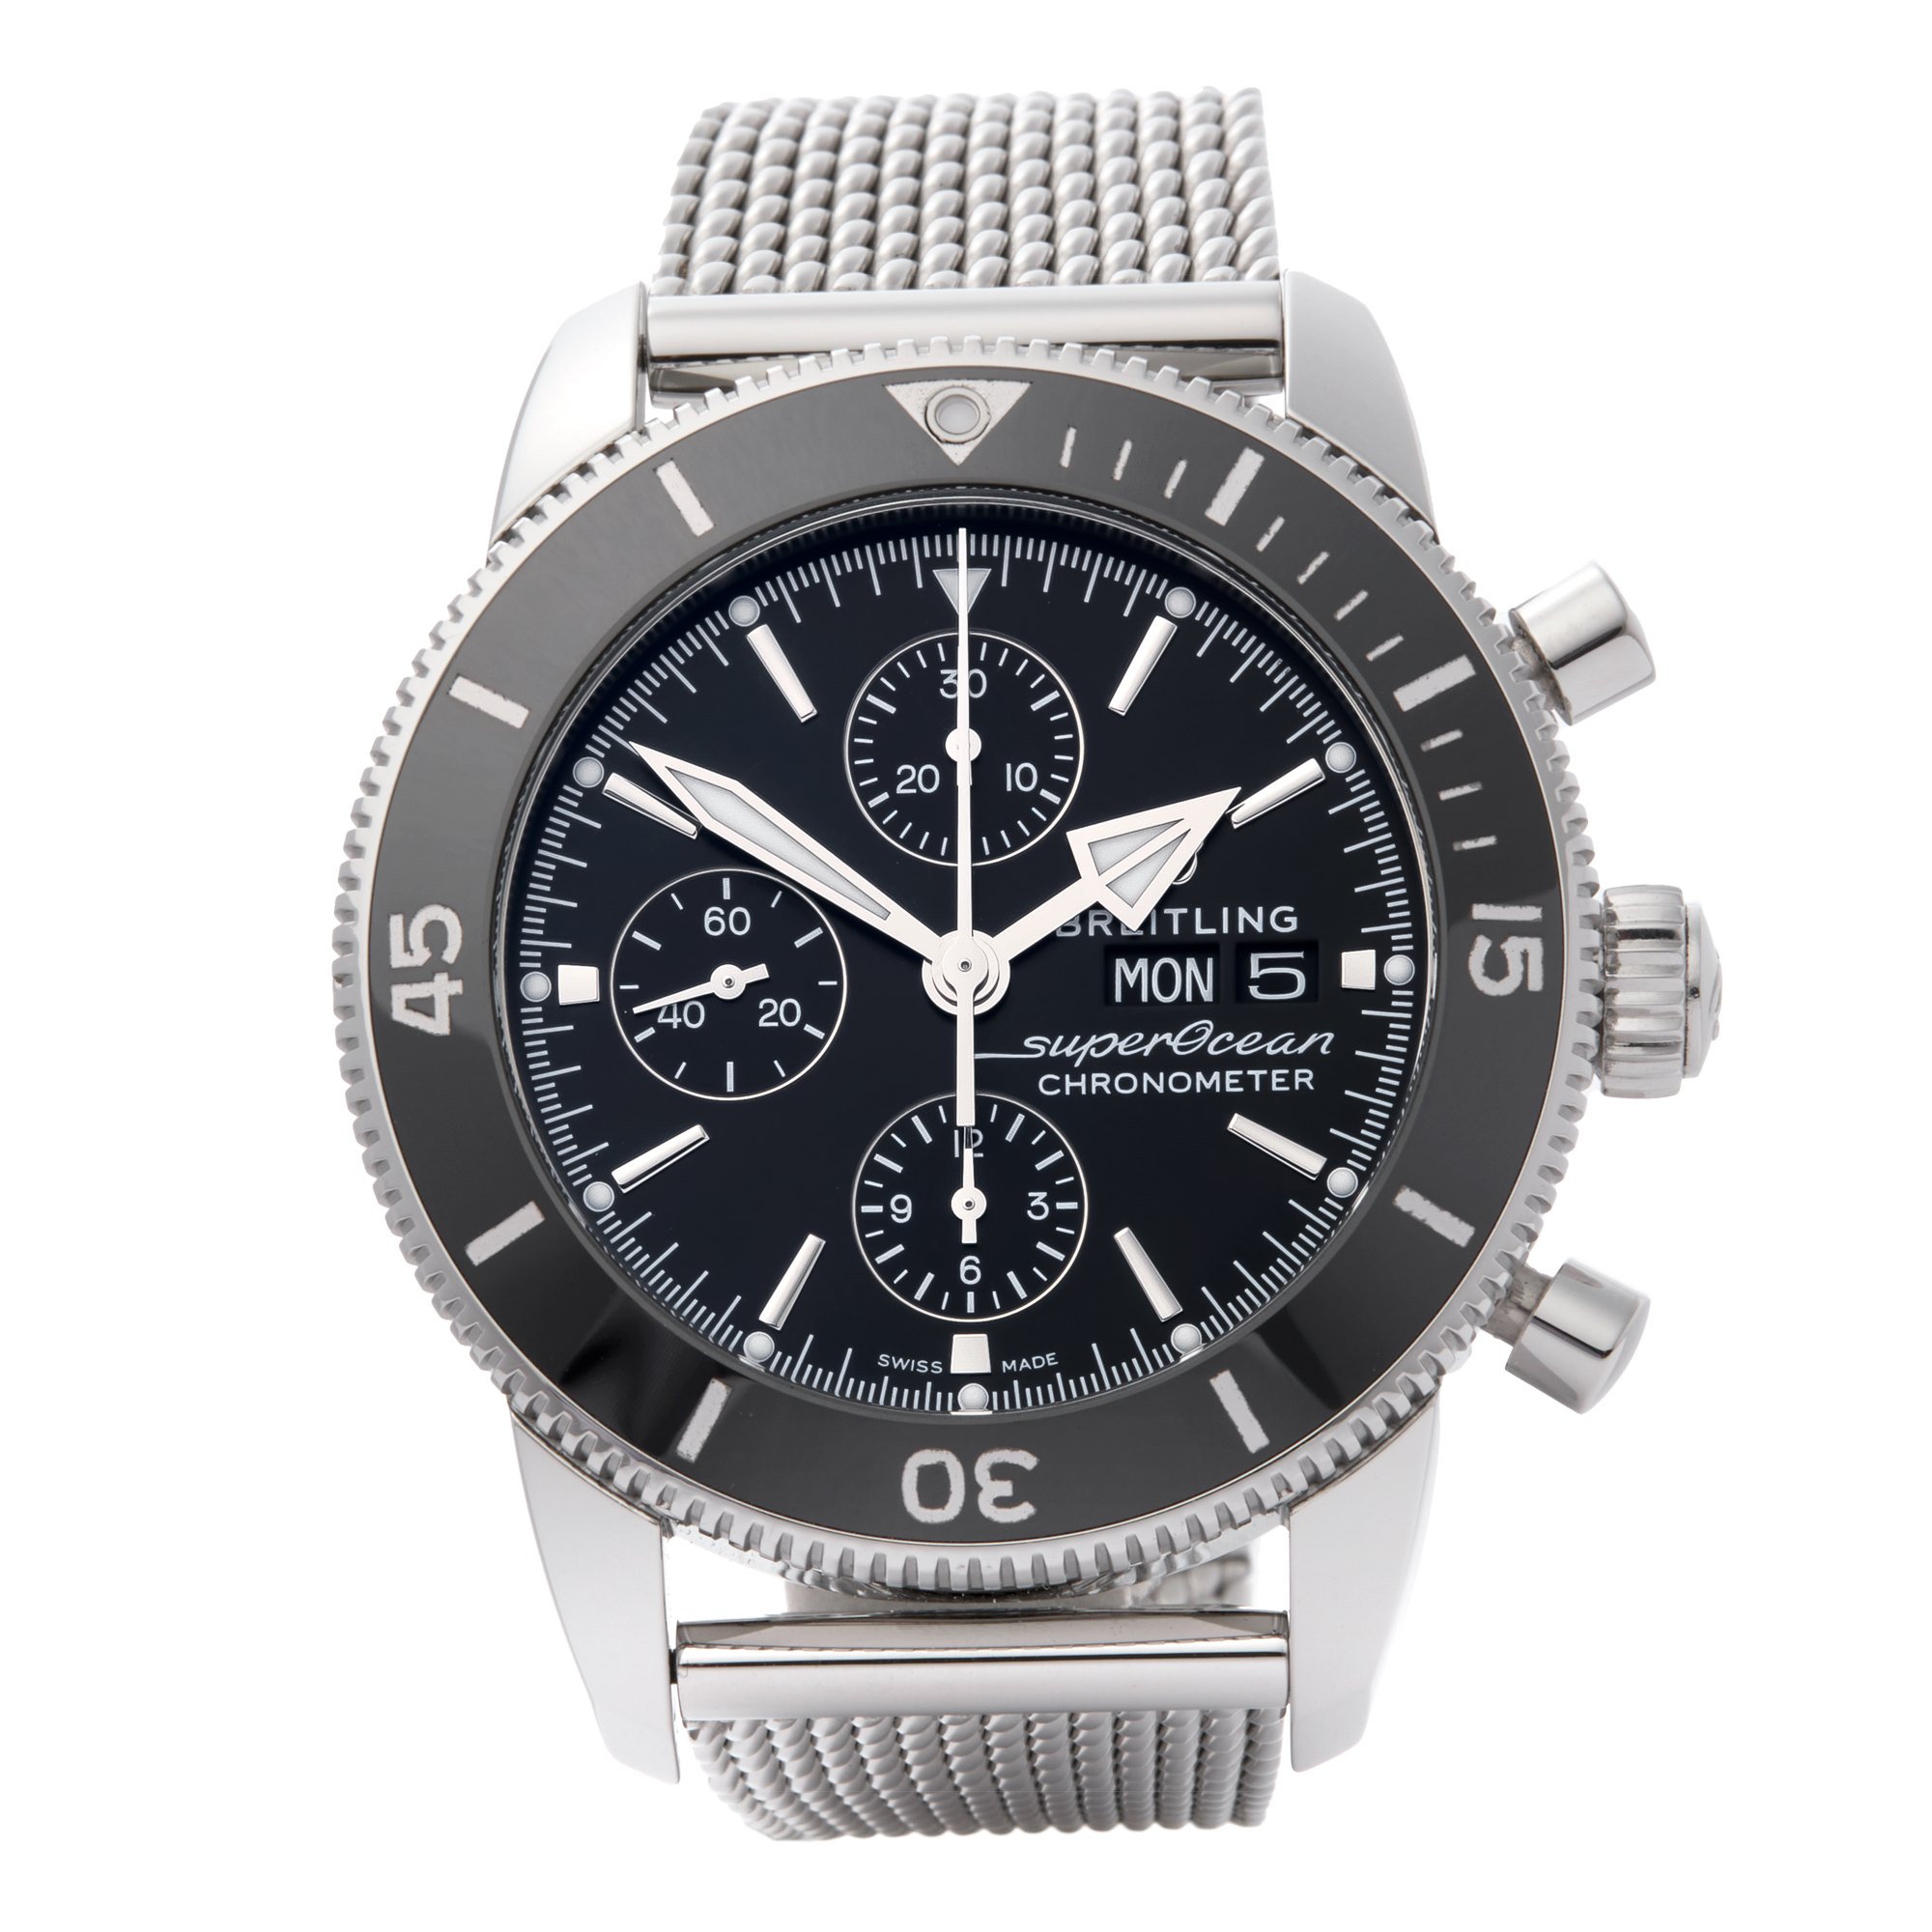 Breitling Superocean II Chronograph Roestvrij Staal A133131B1A1